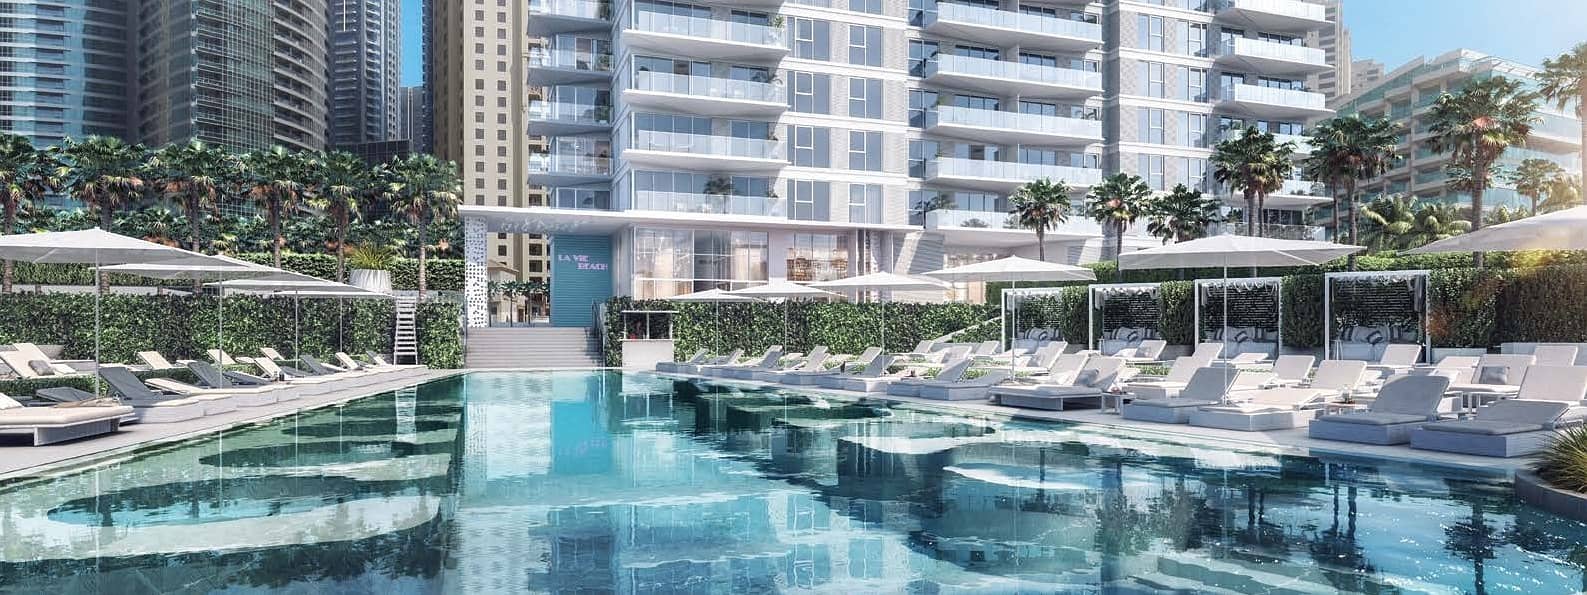 11 Resort Living in the Heart of Jumeirah | Private Access to Jumeirah Beach